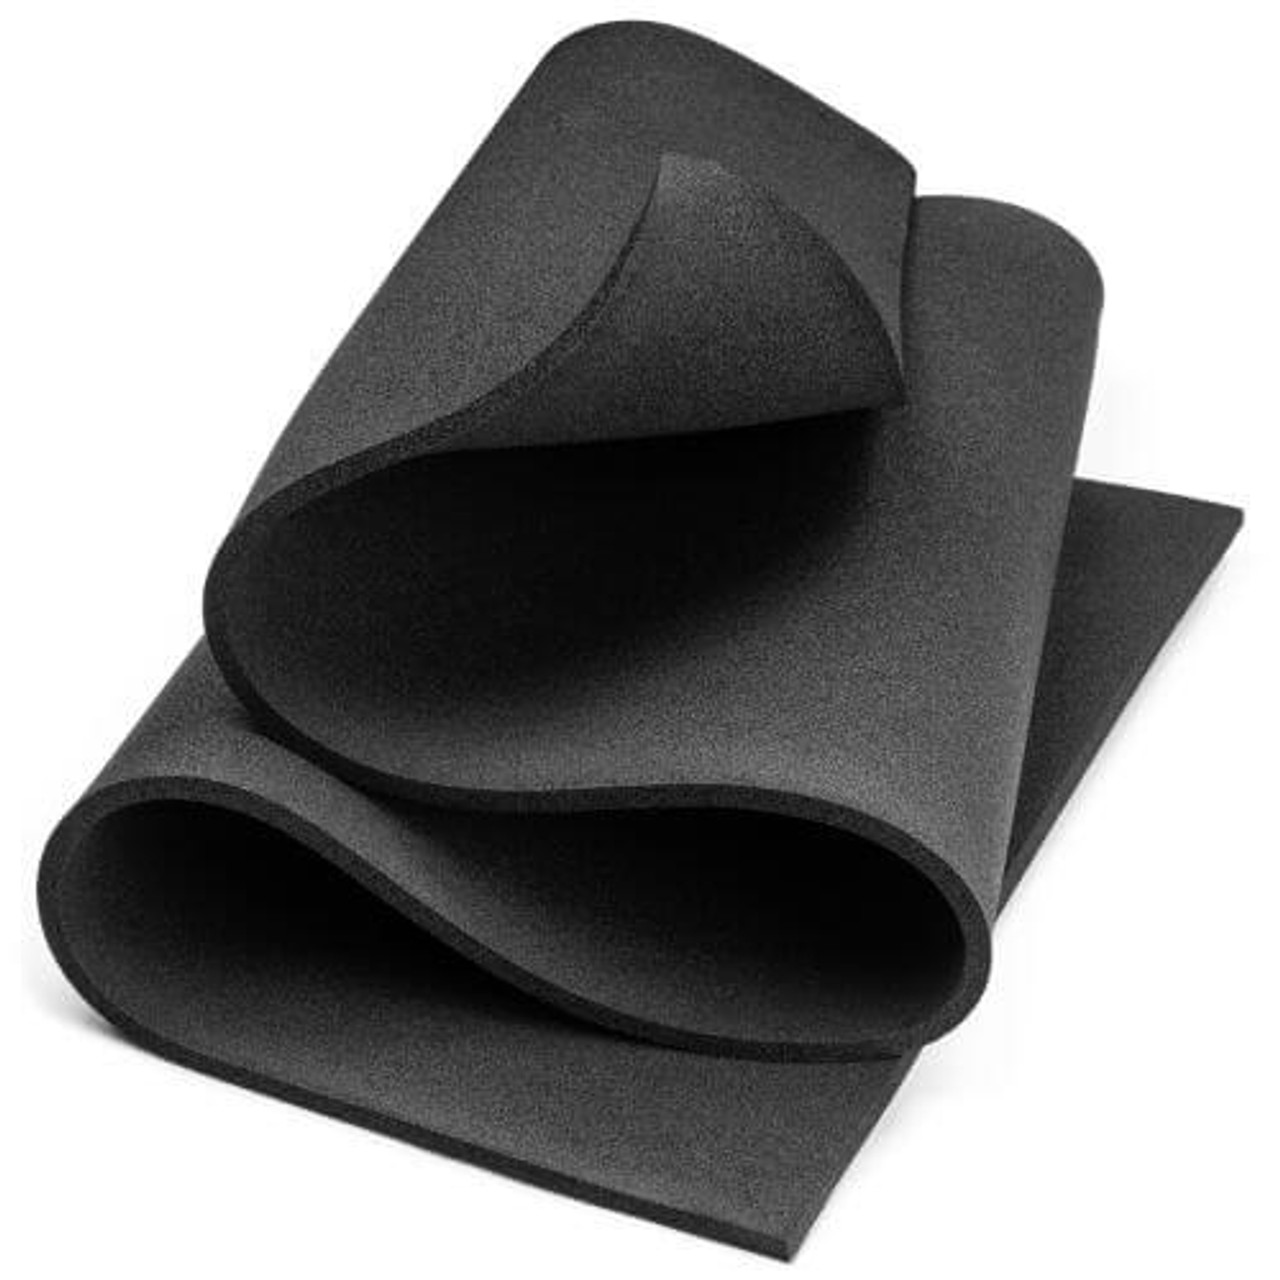 Second Skin Overkill Pro Closed Cell Sound Insulation Foam for Cars 